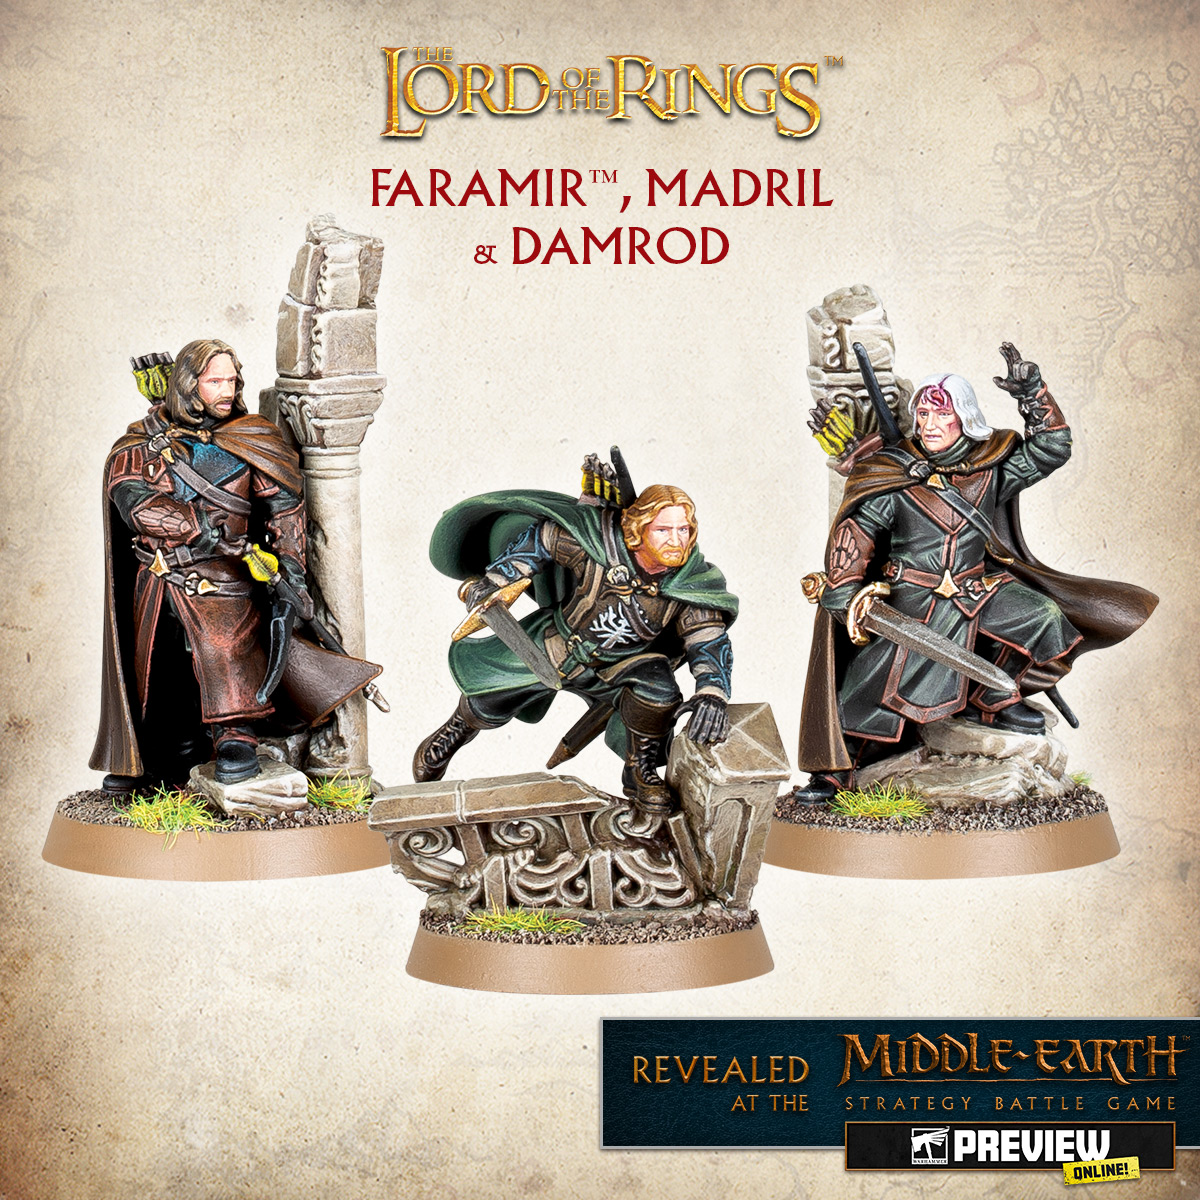 Faramir Madril & Damrod - Middle-earth Strategy Battle Game